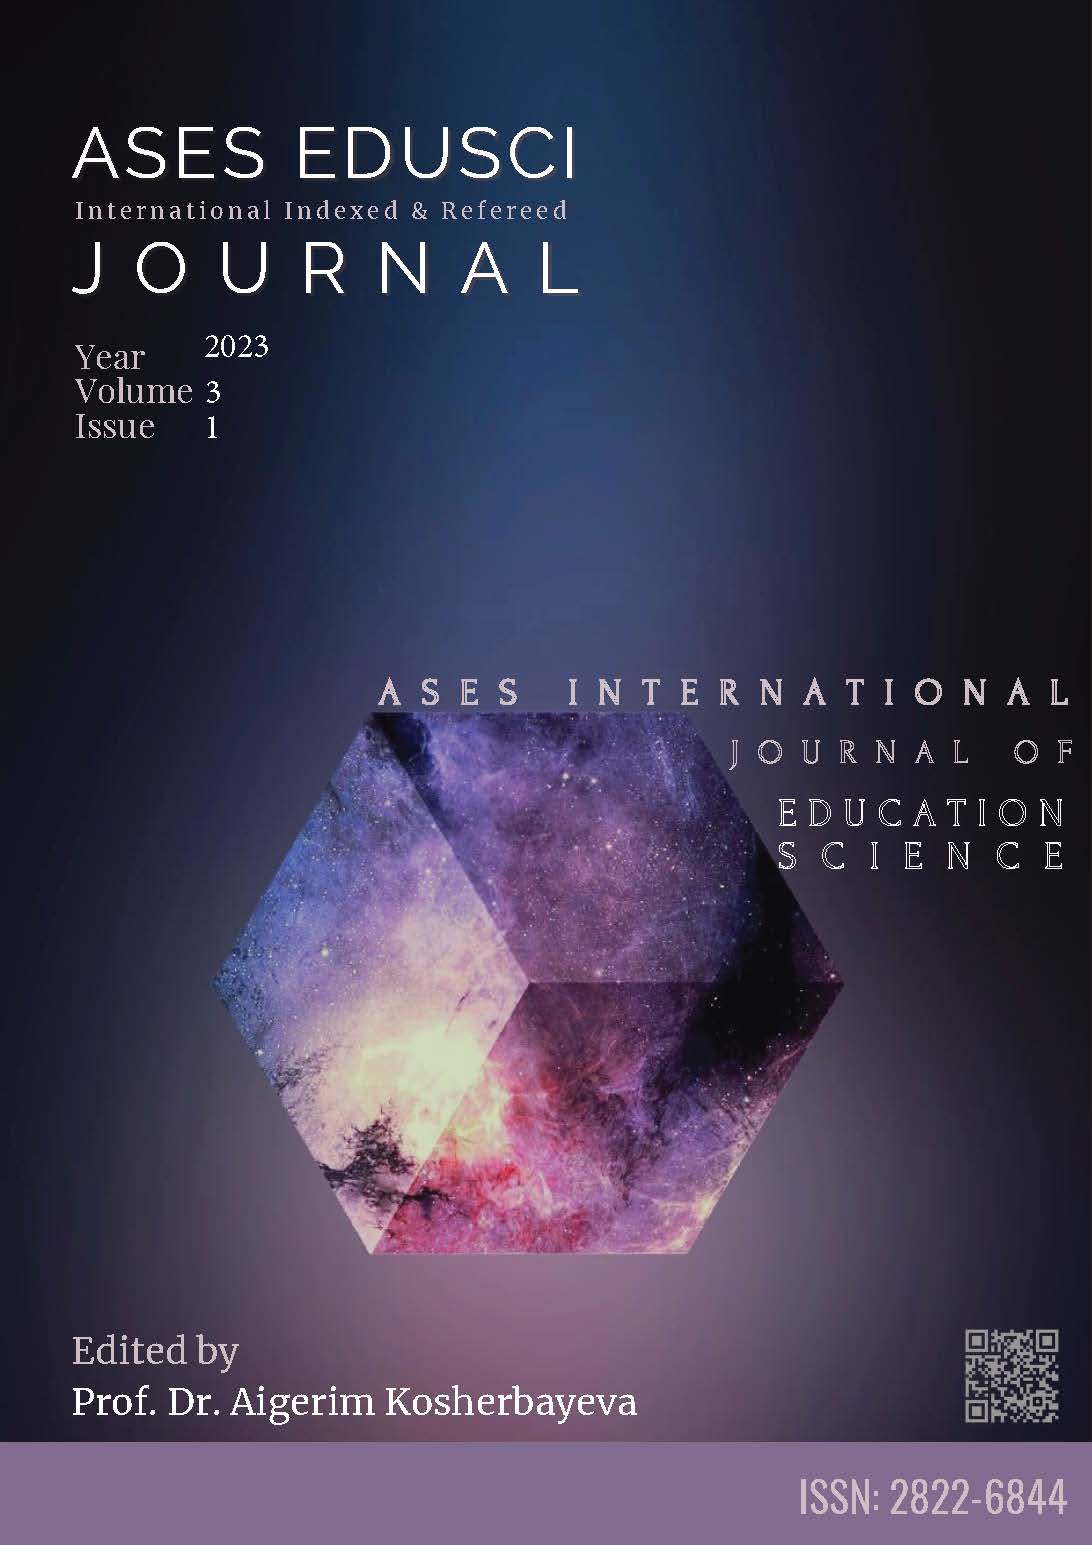 					View Vol. 3 No. 1 (2023): ASES INTERNATIONAL JOURNAL OF EDUCATIONAL SCIENCES
				